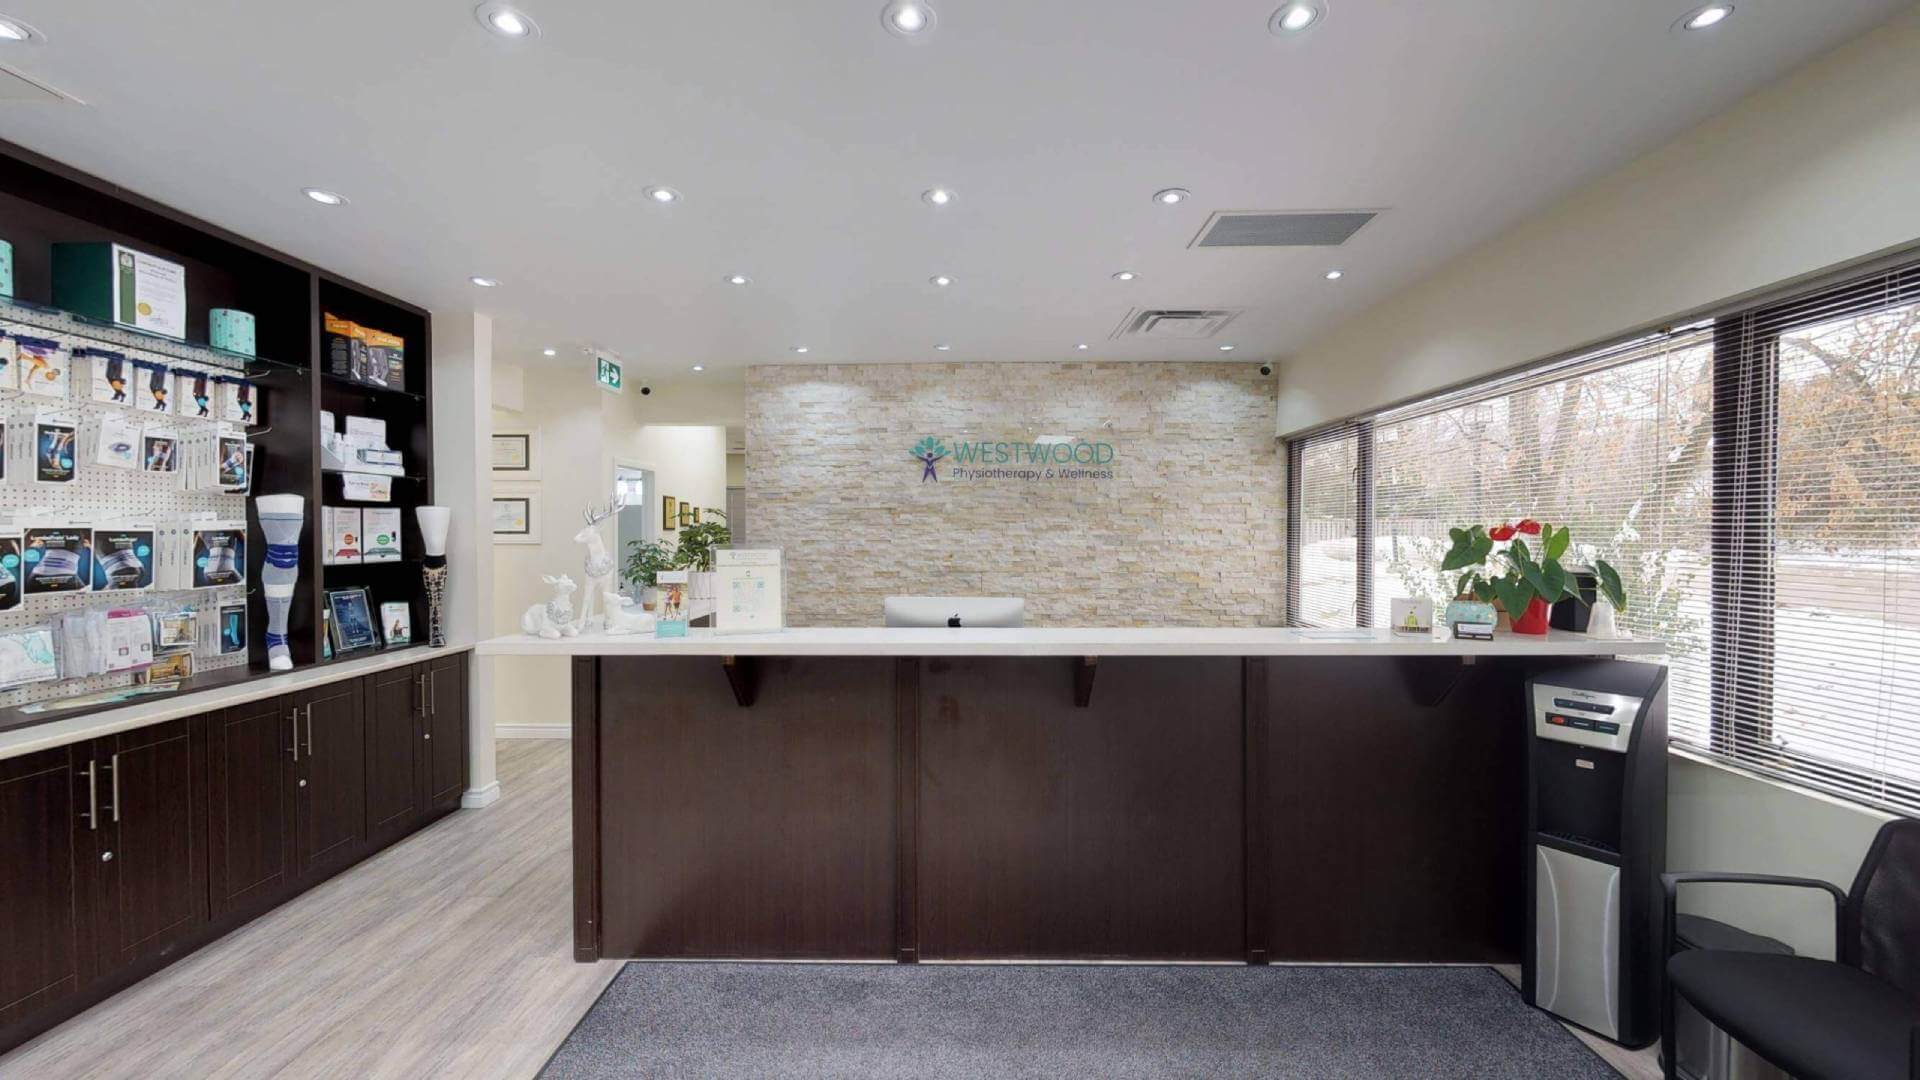 Westwood-Physiotherapy-and-Wellness-Reception-11252019_192004